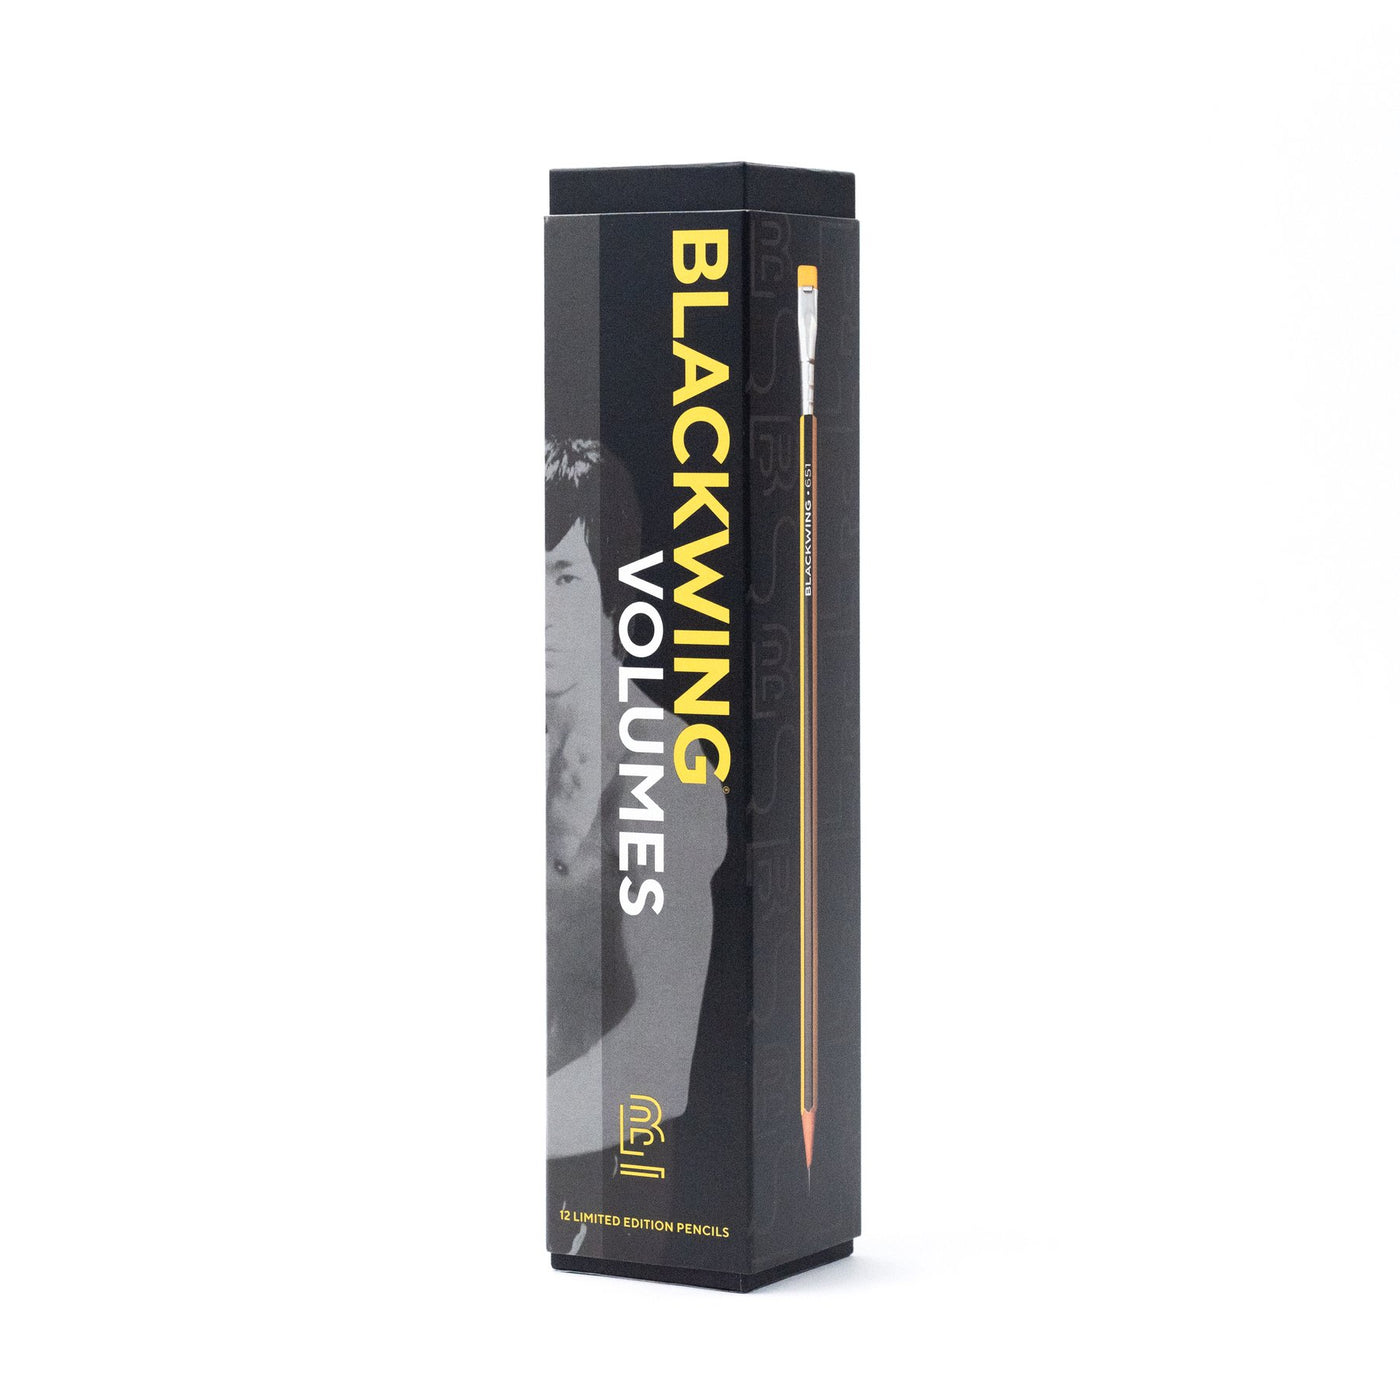 Blackwing Limited Edition Volume 651 - Box of 12 Pencils